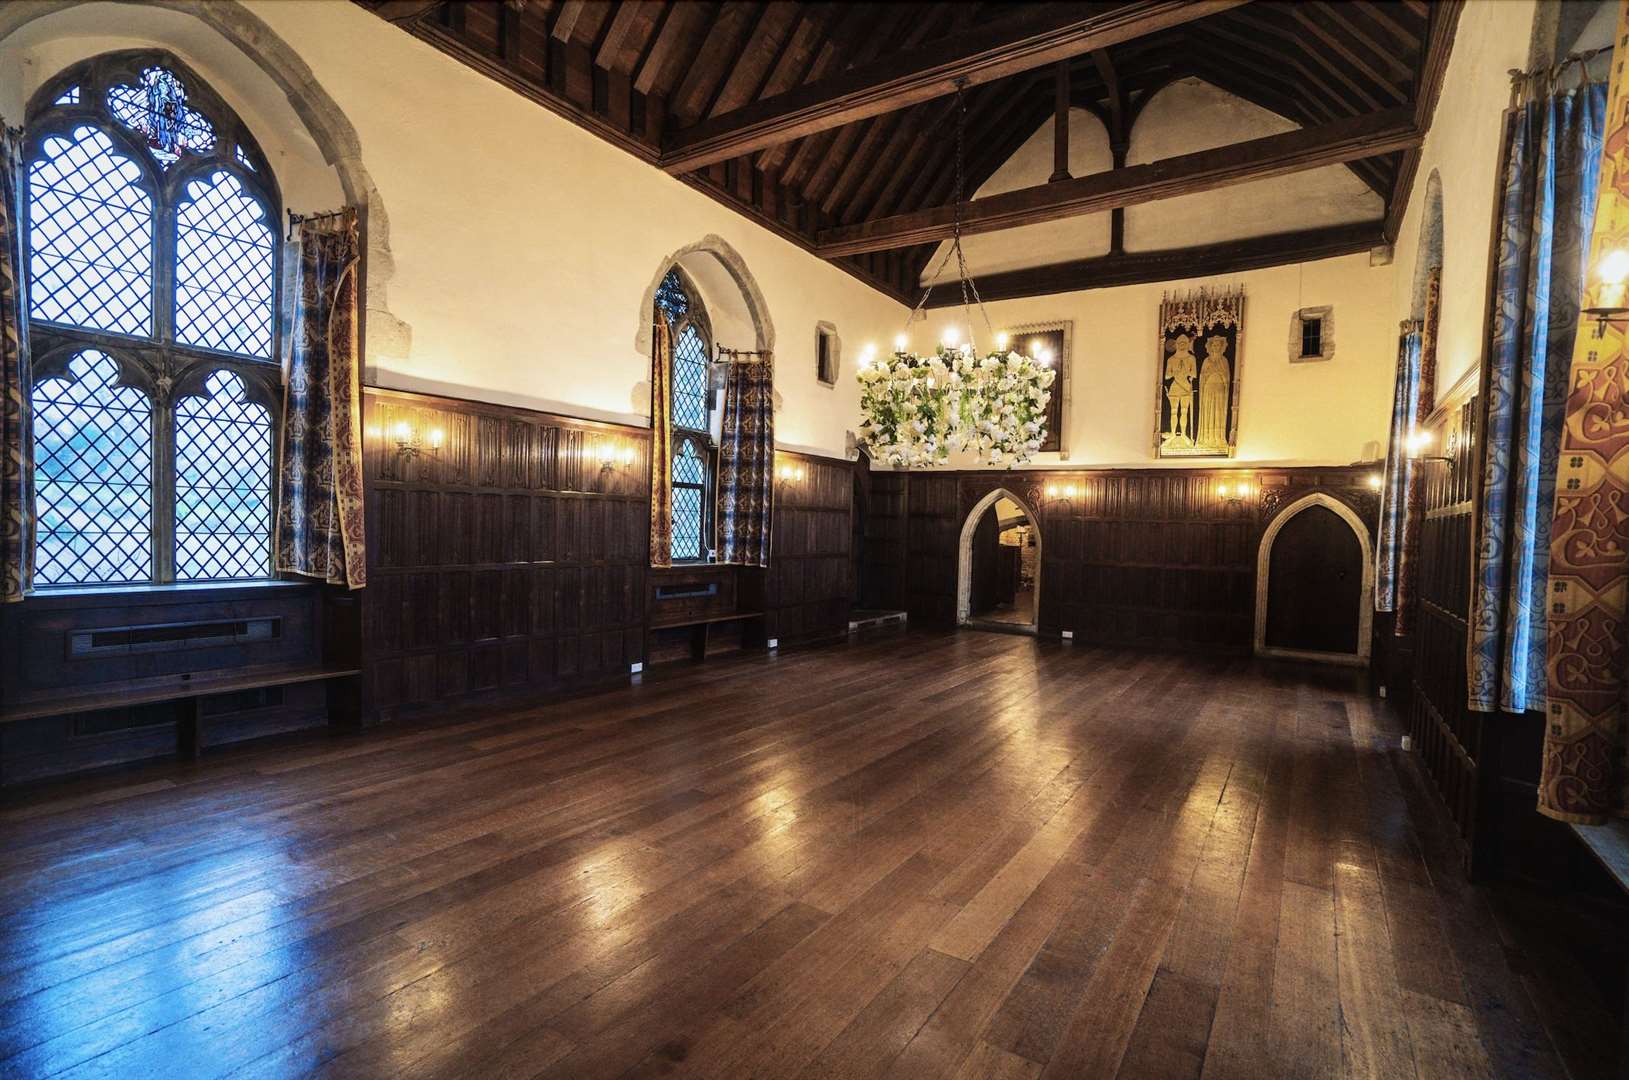 The great room at Lympne Castle, near Hythe. Picture: Scott Collier